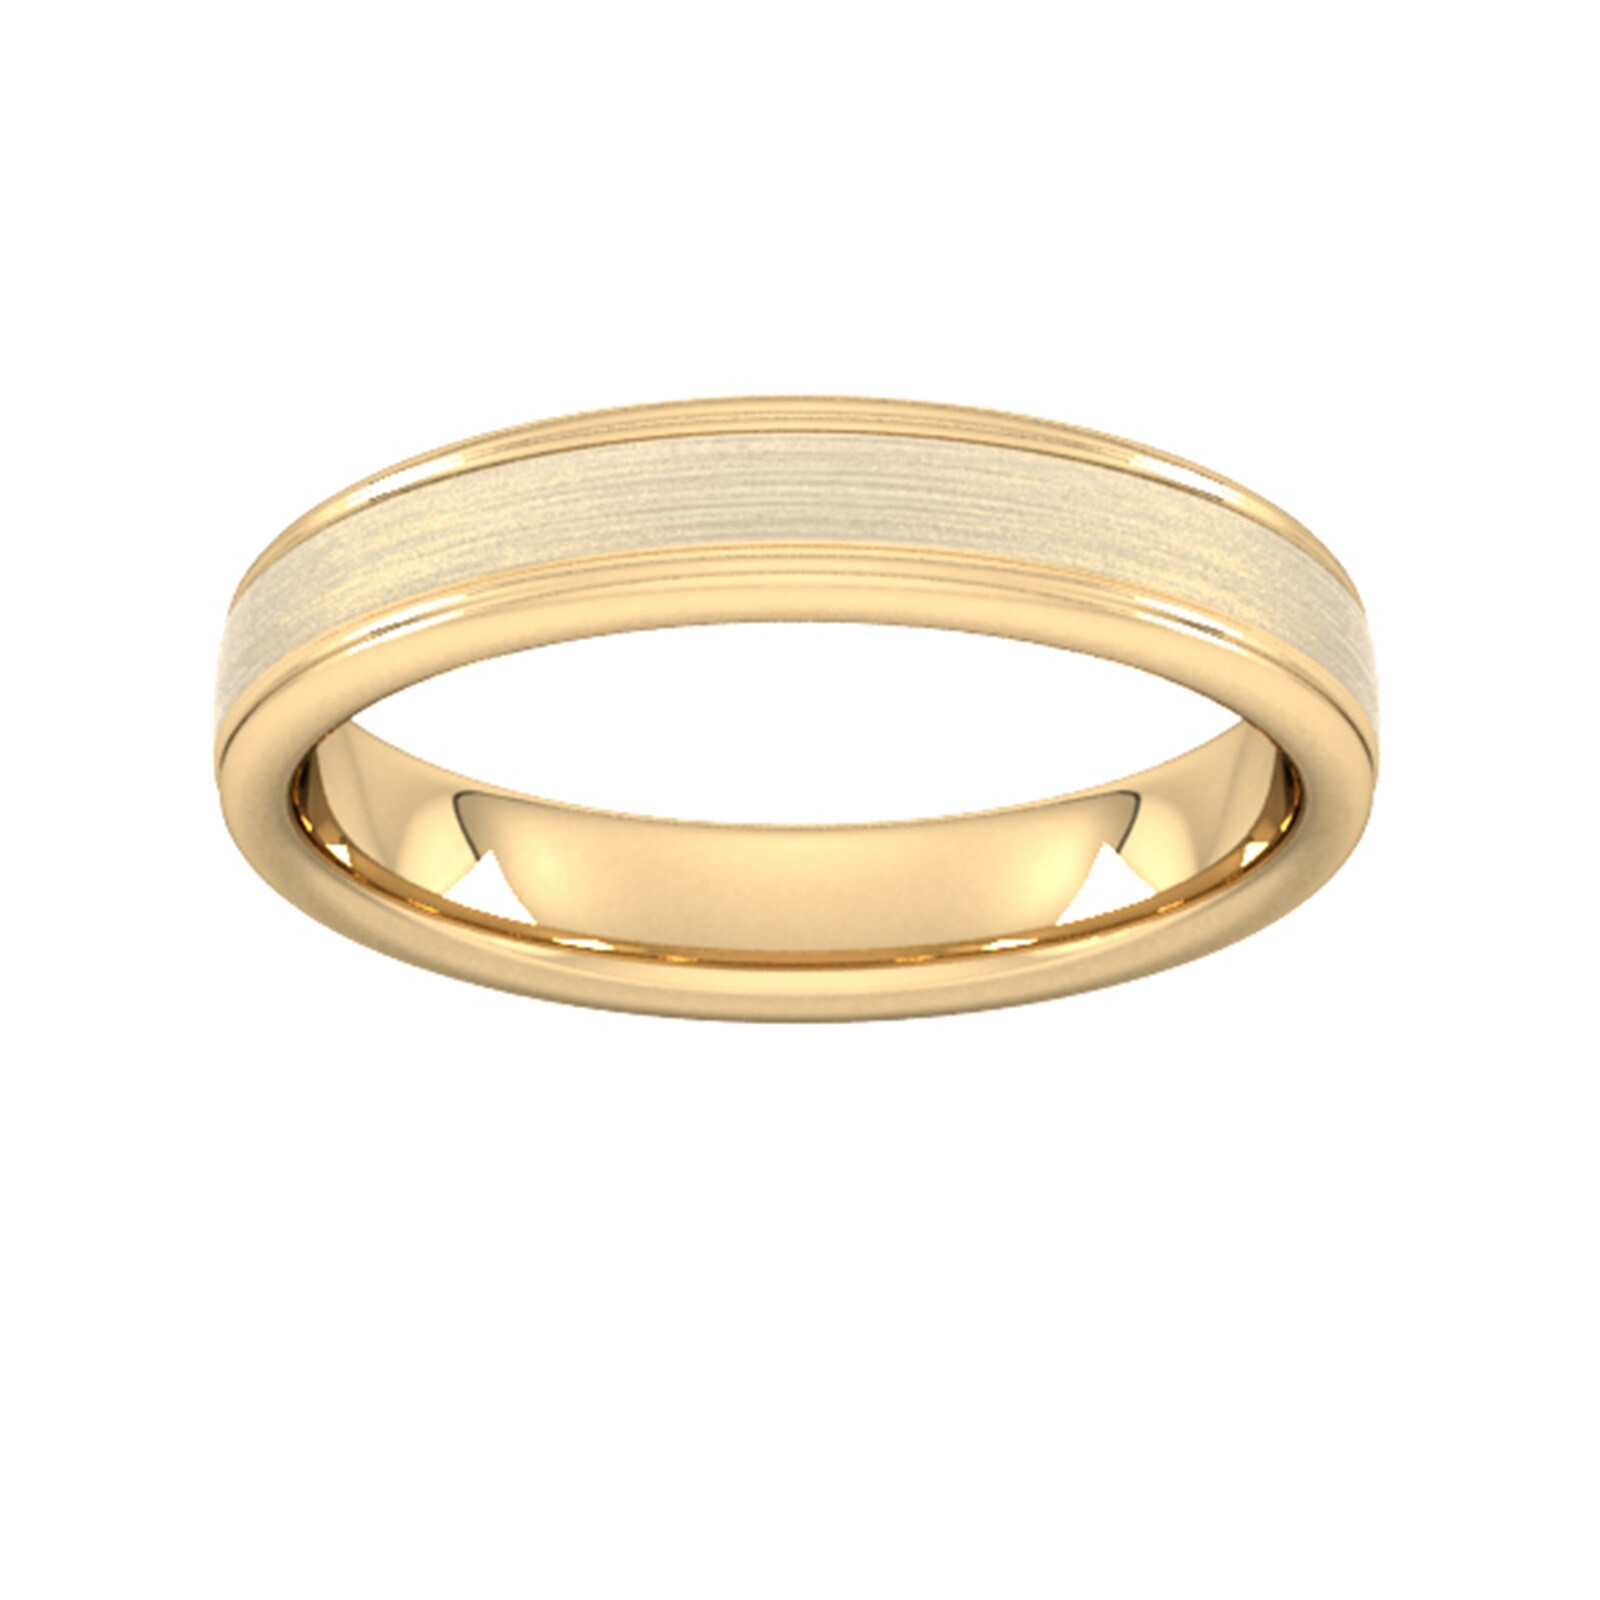 4mm D Shape Standard Matt Centre With Grooves Wedding Ring In 9 Carat Yellow Gold - Ring Size S